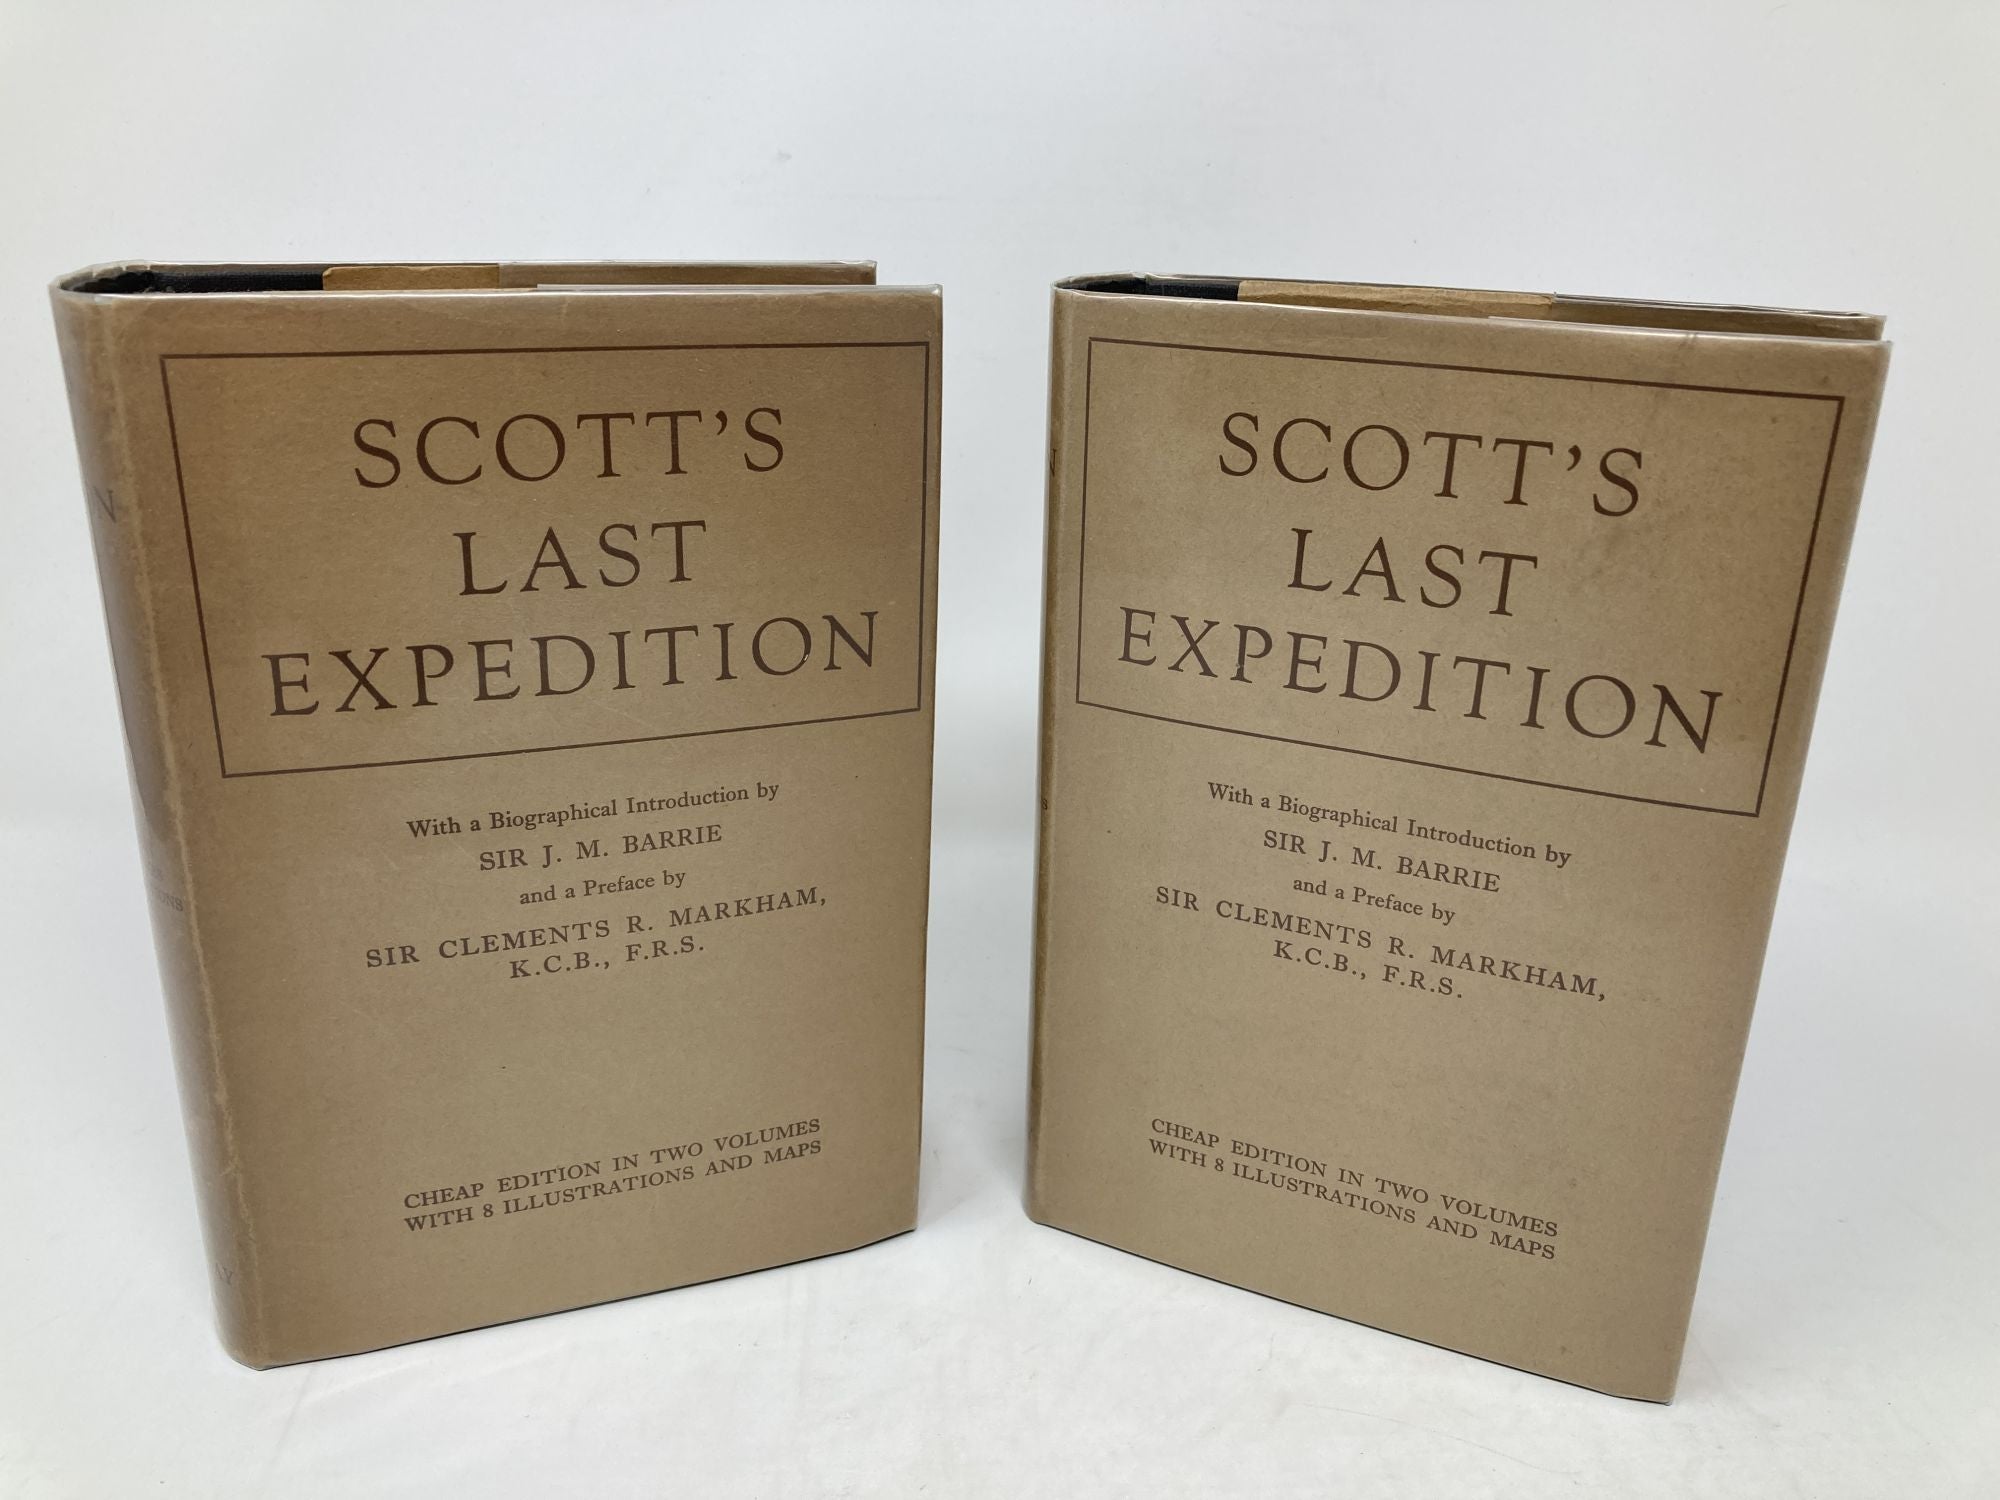 Scott, Robert F. - Scott's Last Expedition, in Two Volumes; Arranged by Leonard Huxley with a Preface by Clements Markham,nd a Biographical Introduction by Sir J.M. Barrie